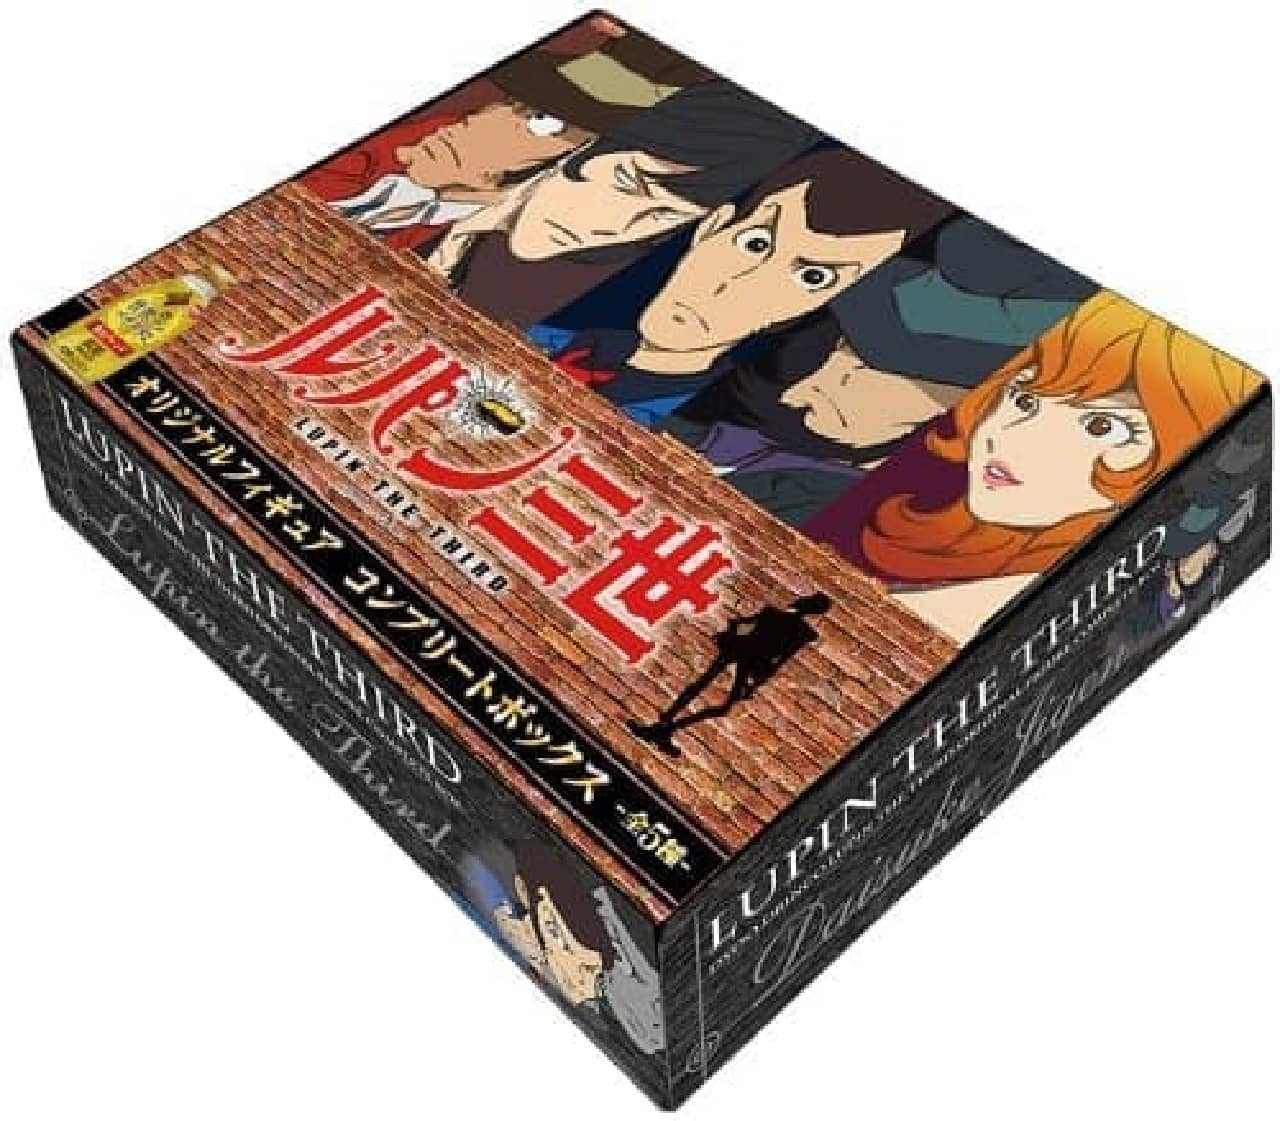 Campaign to get character figures of Dydo Blend, "Lupin III"